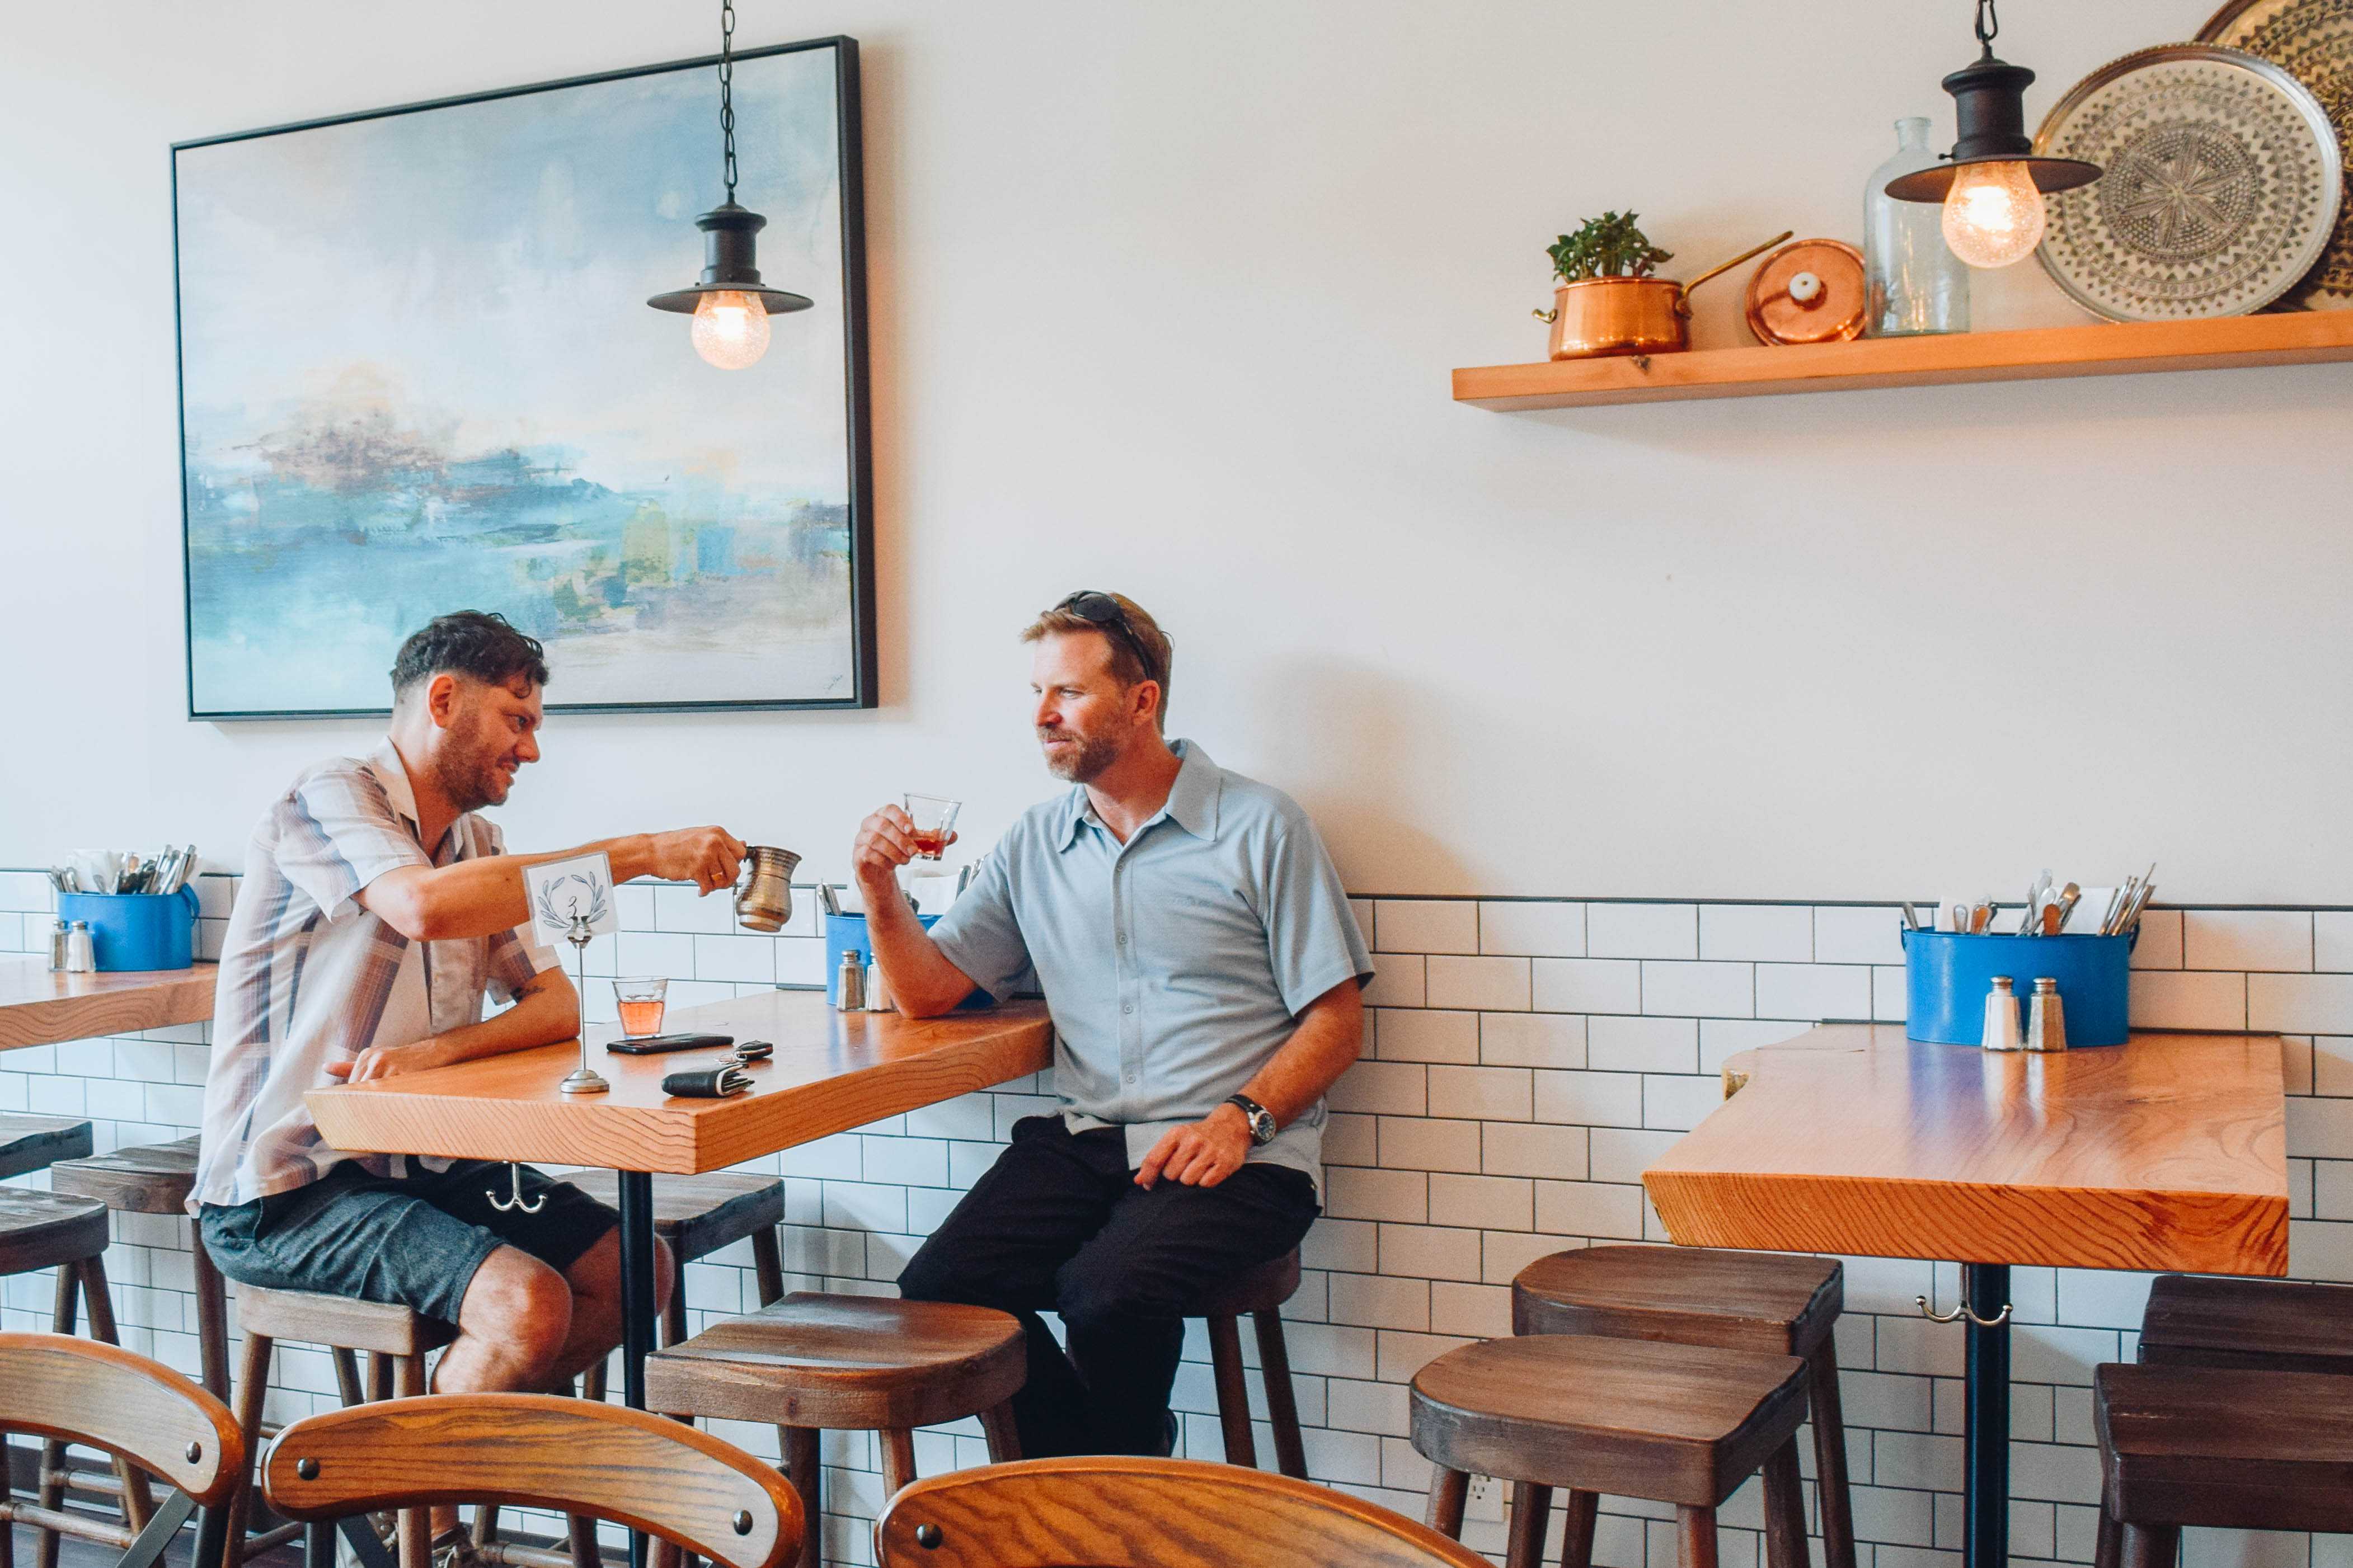 TAKE A SIP Customers Max Weiss (left) and Chris Wellise (right) relax as they wait for their food to arrive.  Photo by Ella Thomsen